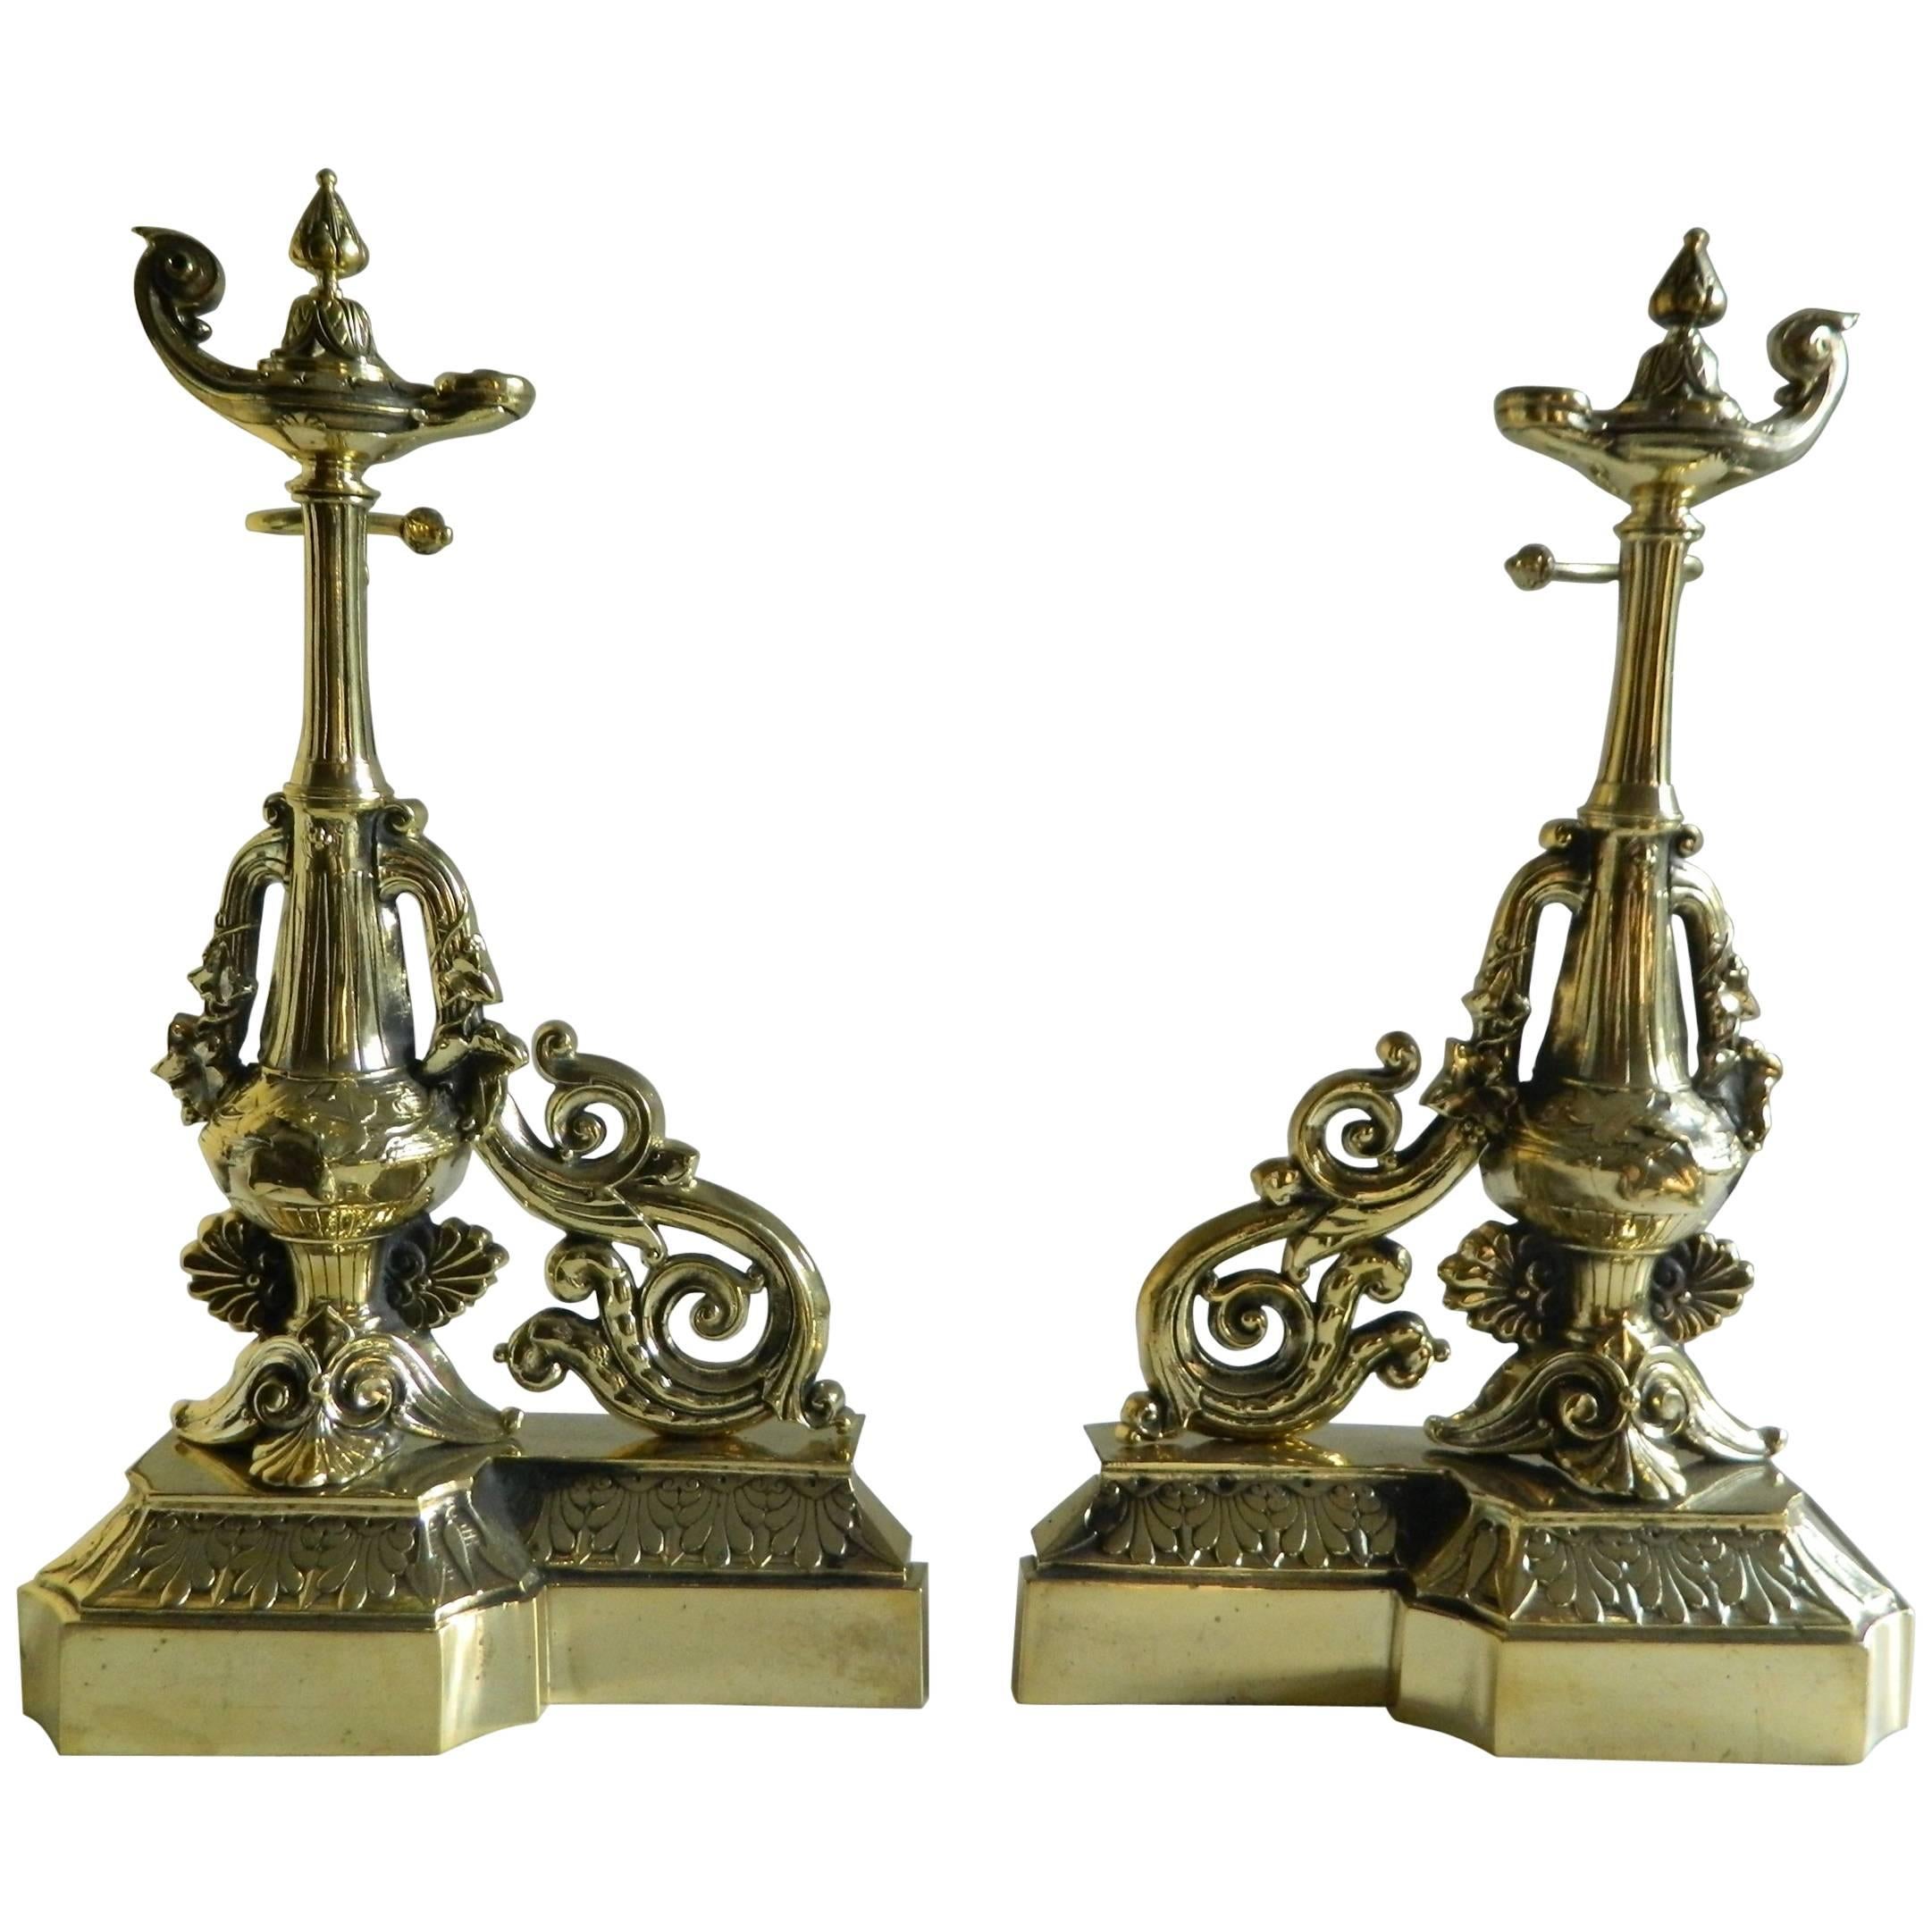 Pair of Brass Chenets or Andirons, Magical or Oil Lamp Motif, 19th Century